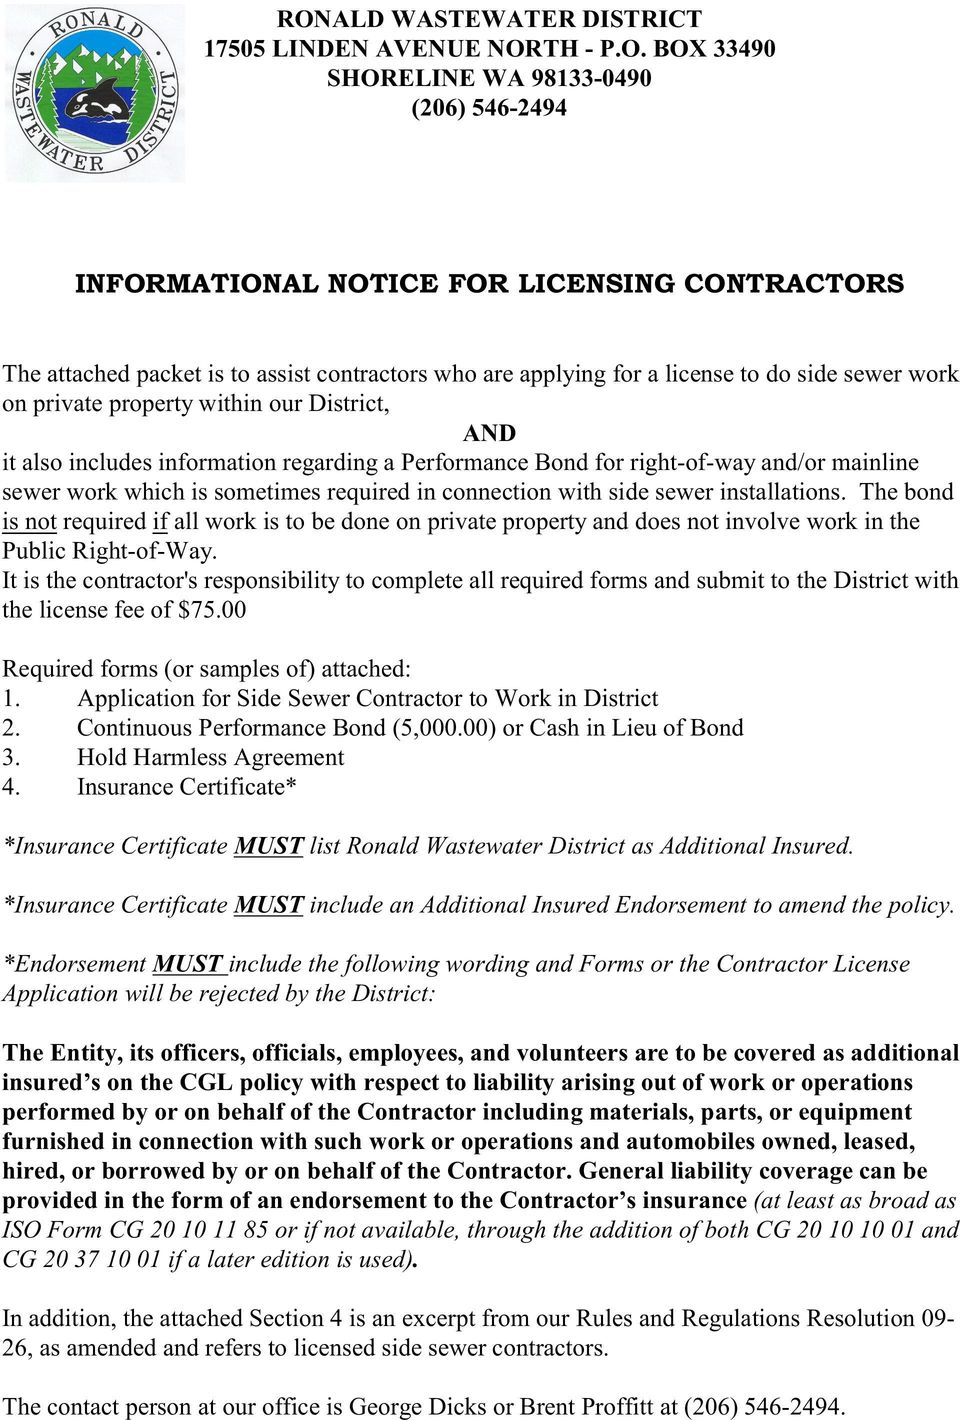 BOX 33490 SHORELINE WA 98133-0490 (206) 546-2494 INFORMATIONAL NOTICE FOR LICENSING CONTRACTORS The attached packet is to assist contractors who are applying for a license to do side sewer work on